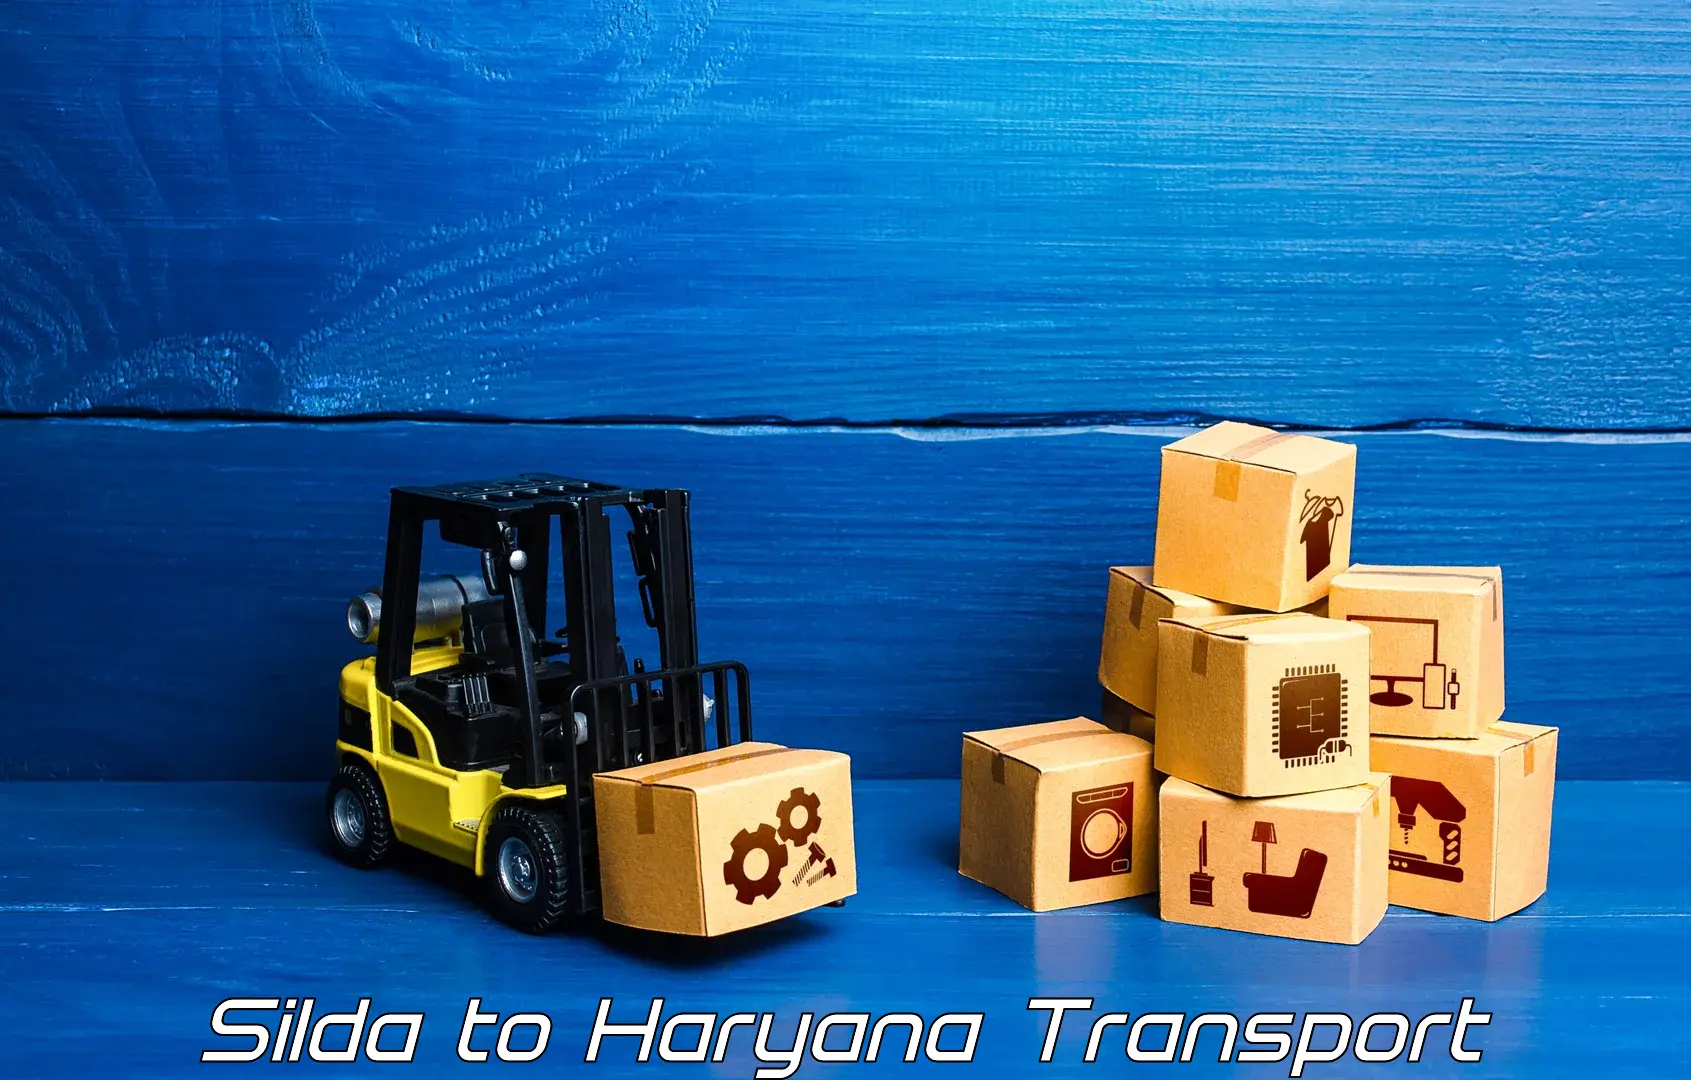 Goods delivery service Silda to Haryana